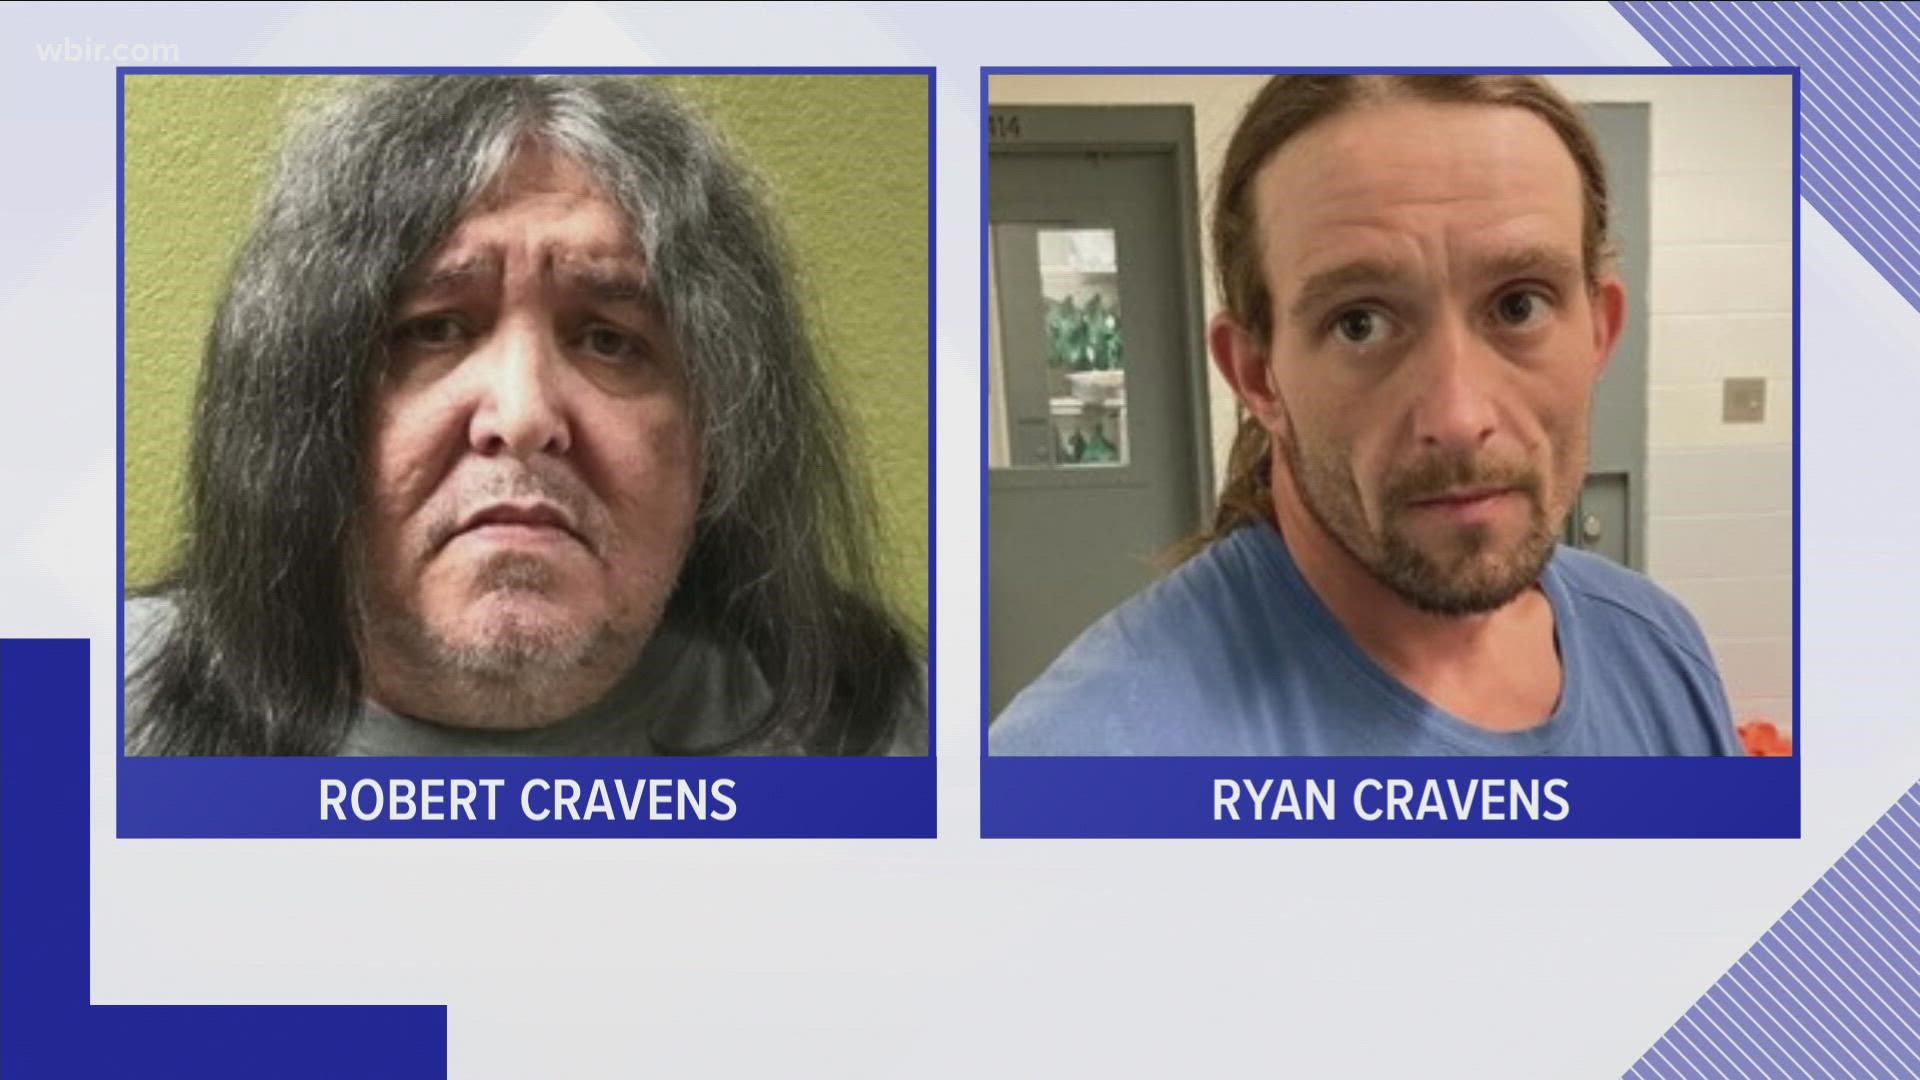 The Tennessee Bureau of Investigation says Robert Cravens and his son Ryan Cravens were arrested yesterday and charged with first degree murder.